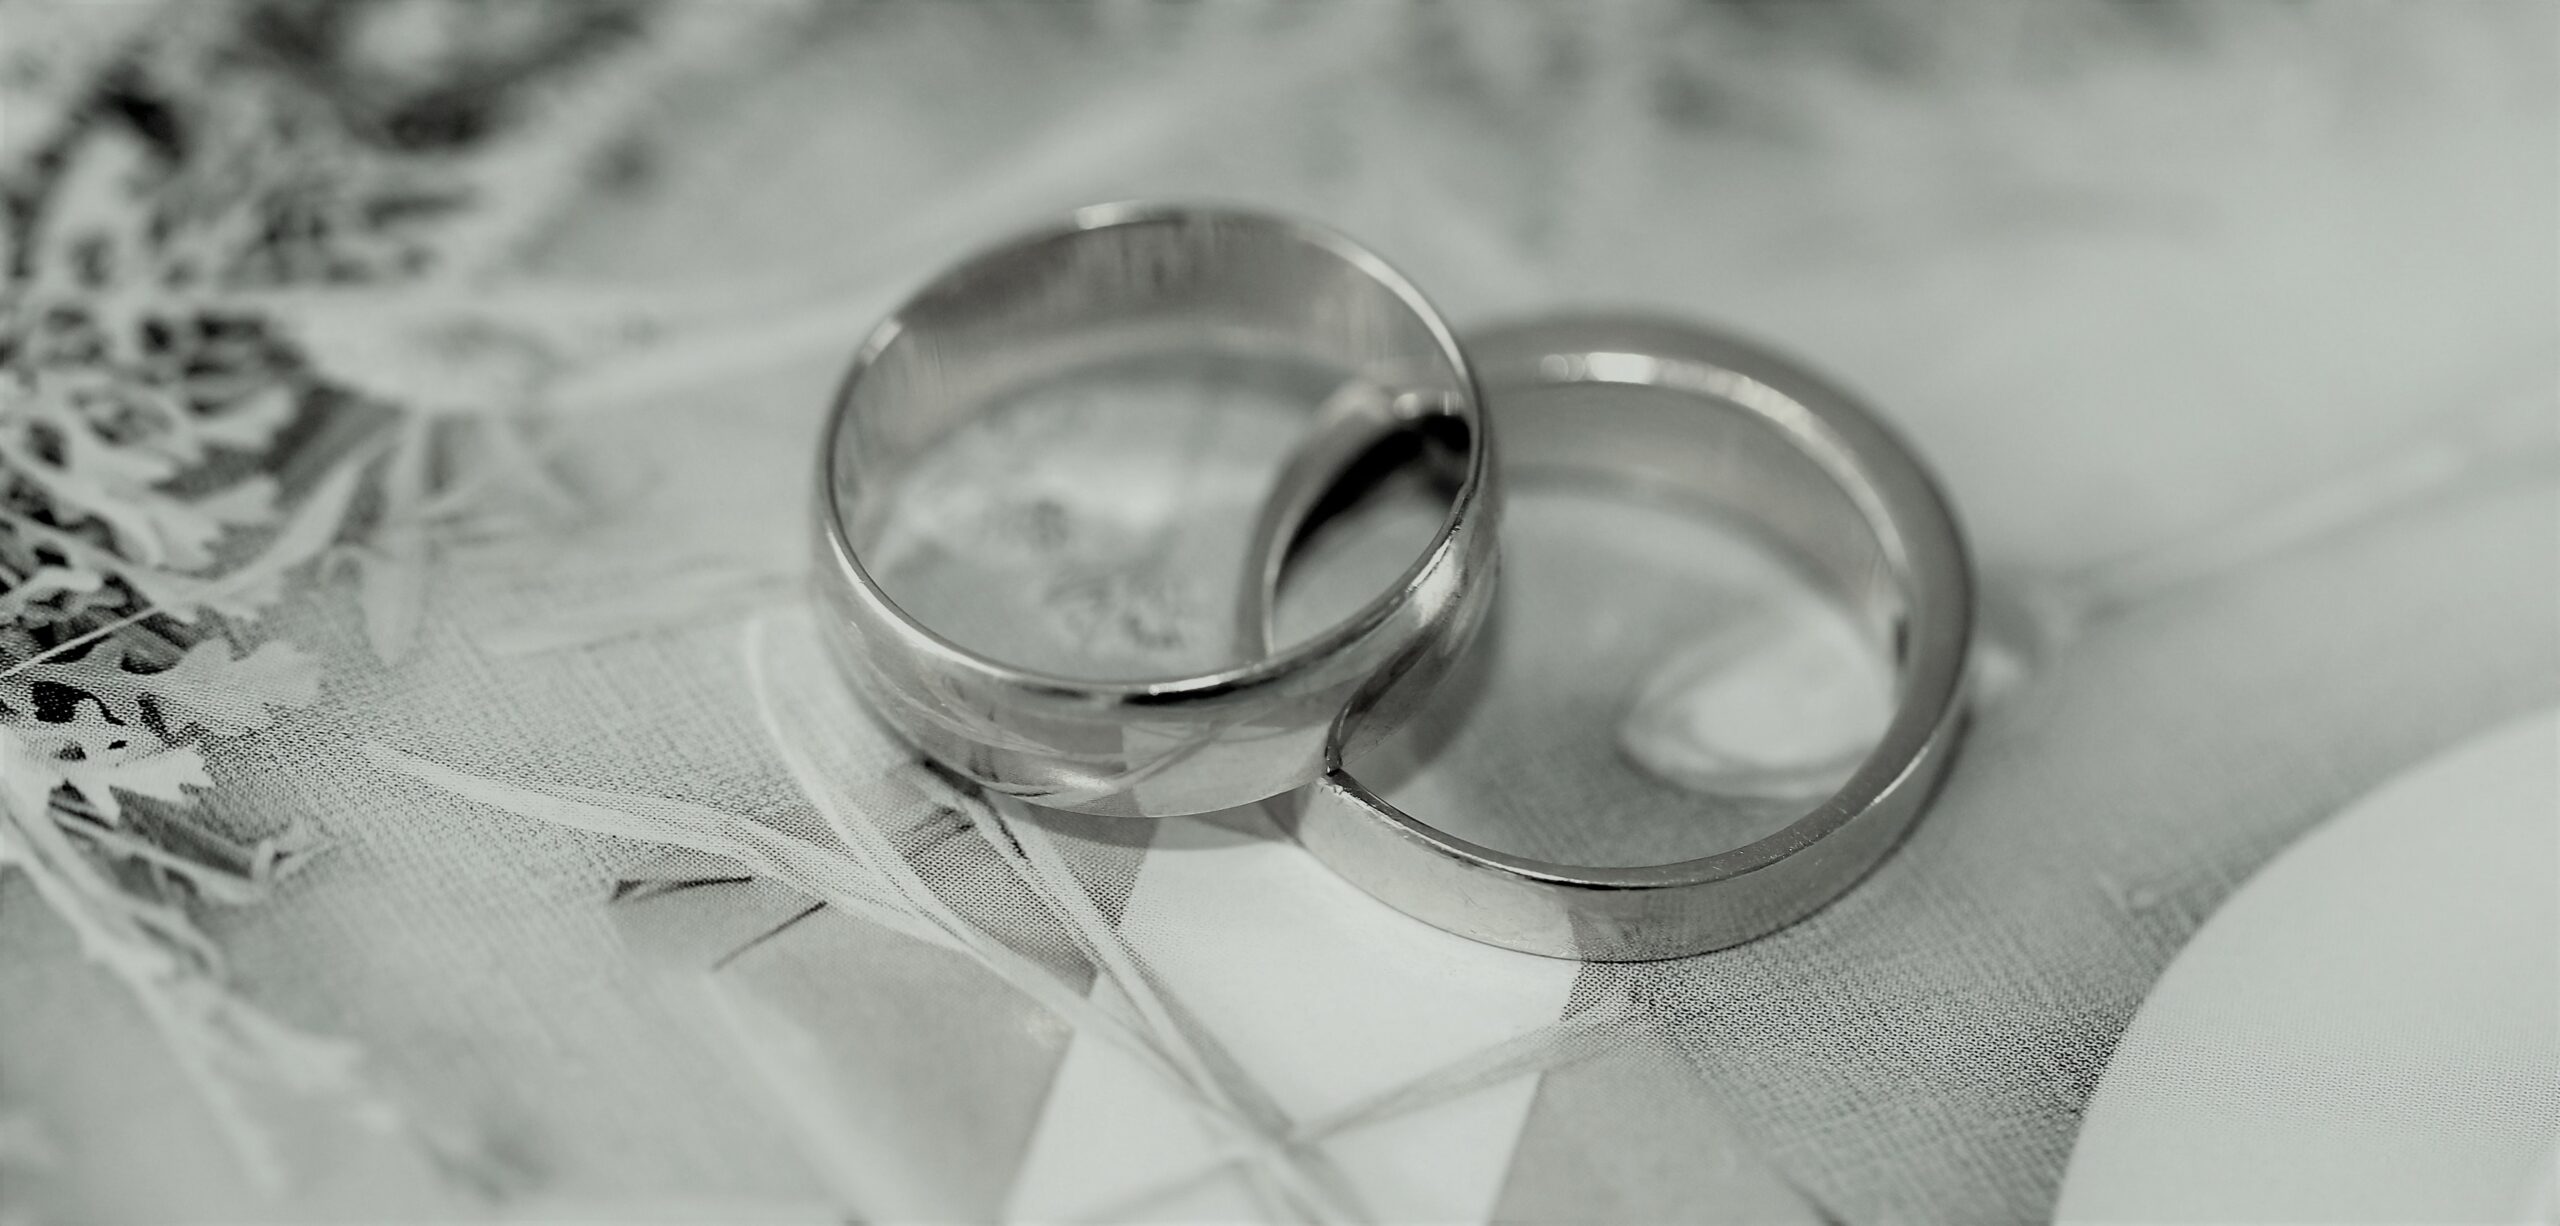 THE LEGAL AGE FOR MARRIAGE AND CIVIL PARTNERSHIP IN ENGLAND AND WALES IS CHANGING